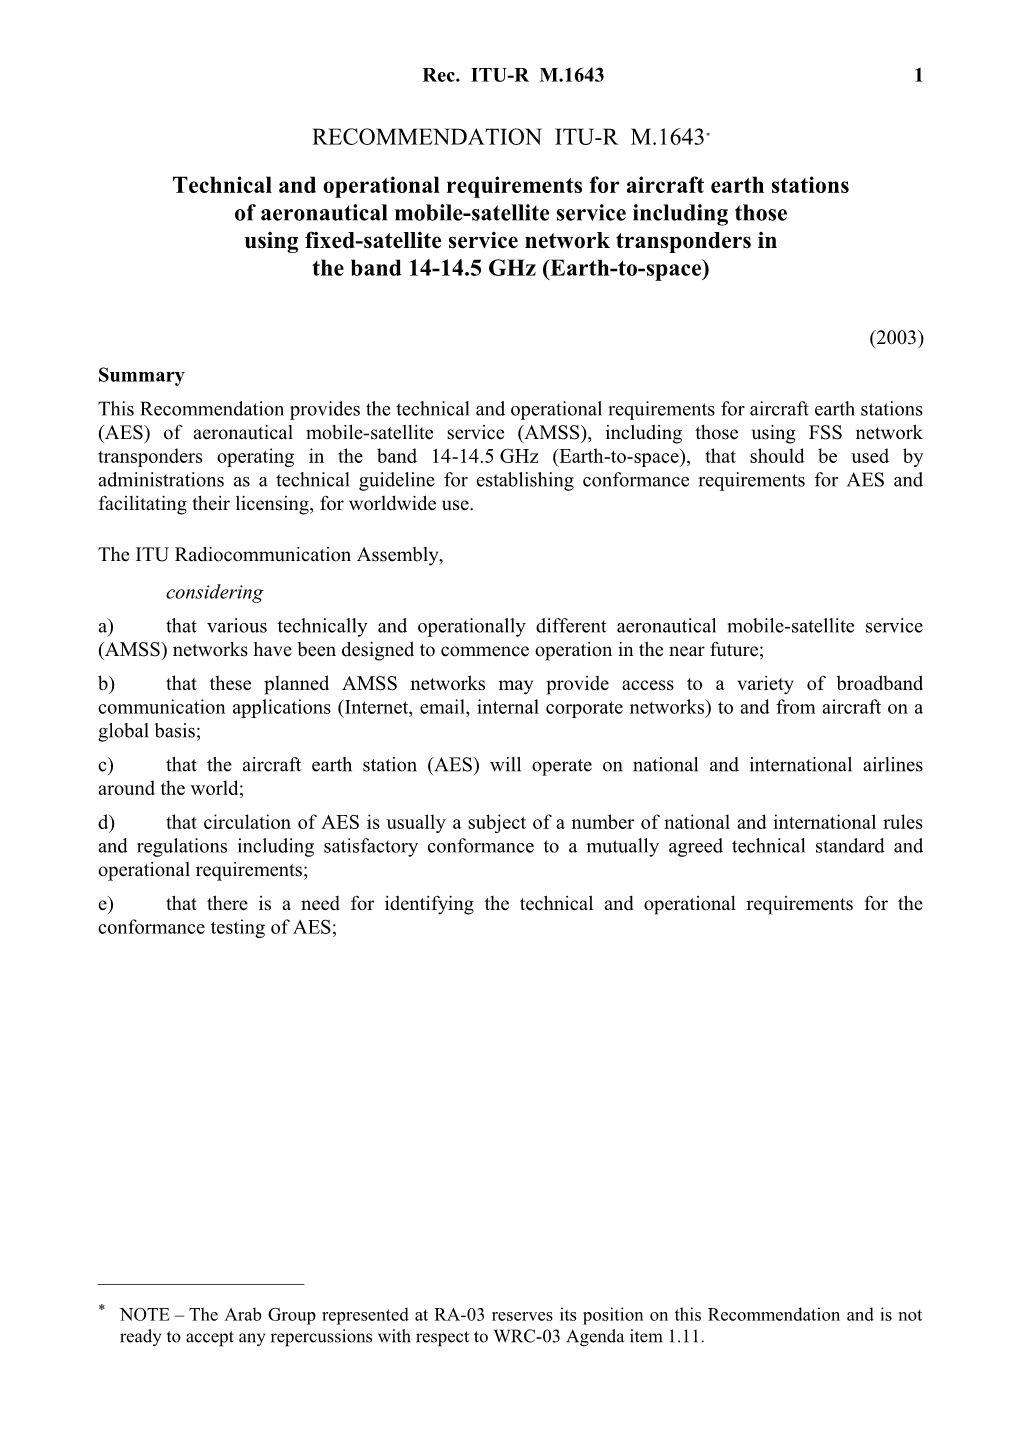 RECOMMENDATION ITU-R M.1643 - Technical and Operational Requirements for Aircraft Earth